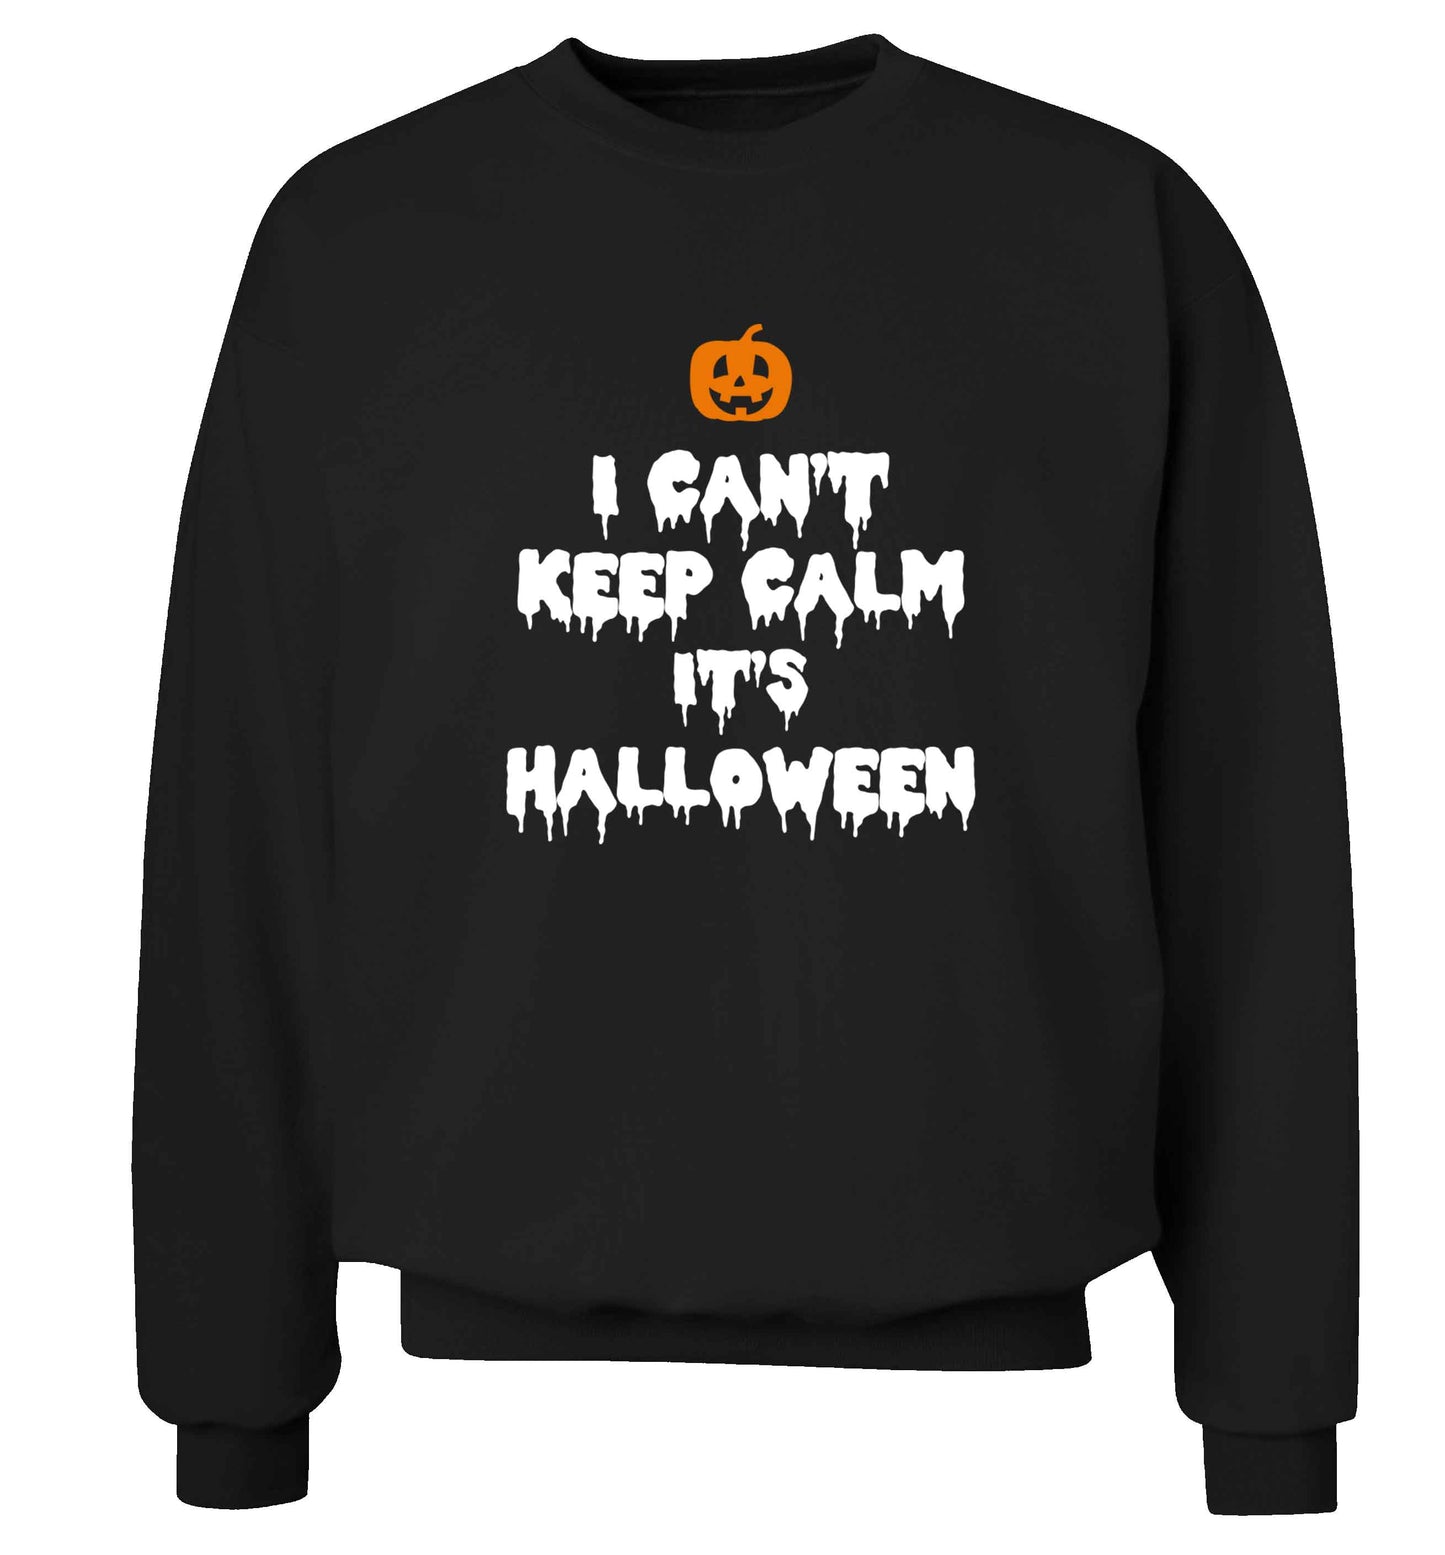 I can't keep calm it's halloween adult's unisex black sweater 2XL